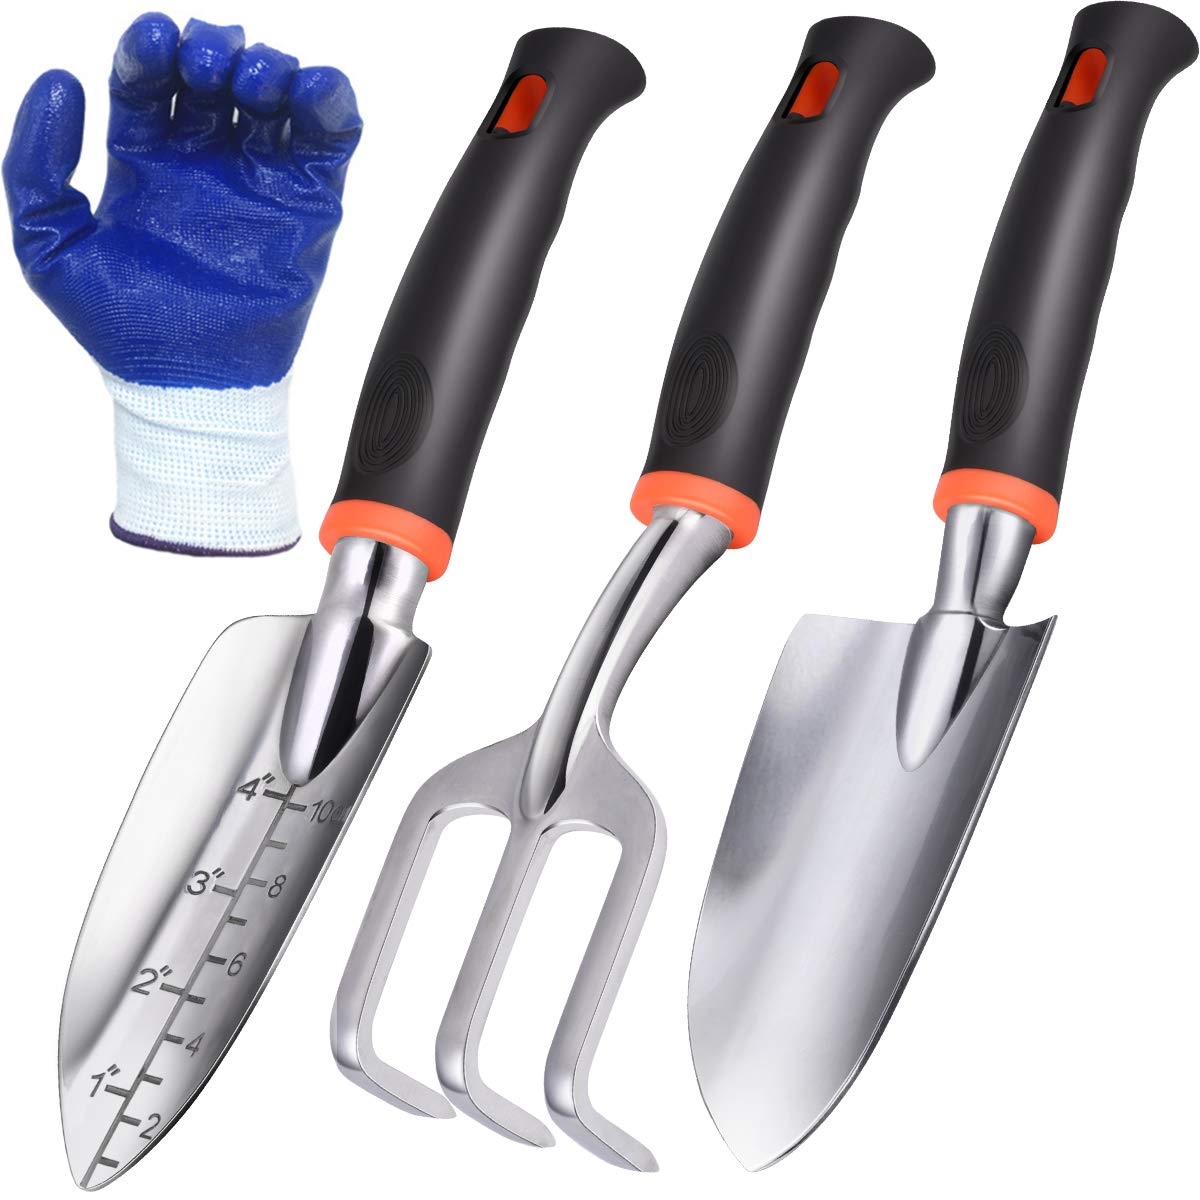 3 Piece Top Quality Cast-Aluminum Heavy Duty Gardening Gifts Tool Set with Trowel & Shovel Ideal For Men and Women Transplanter and Cultivator FANHAO Upgrade Ergo Garden Tool Set